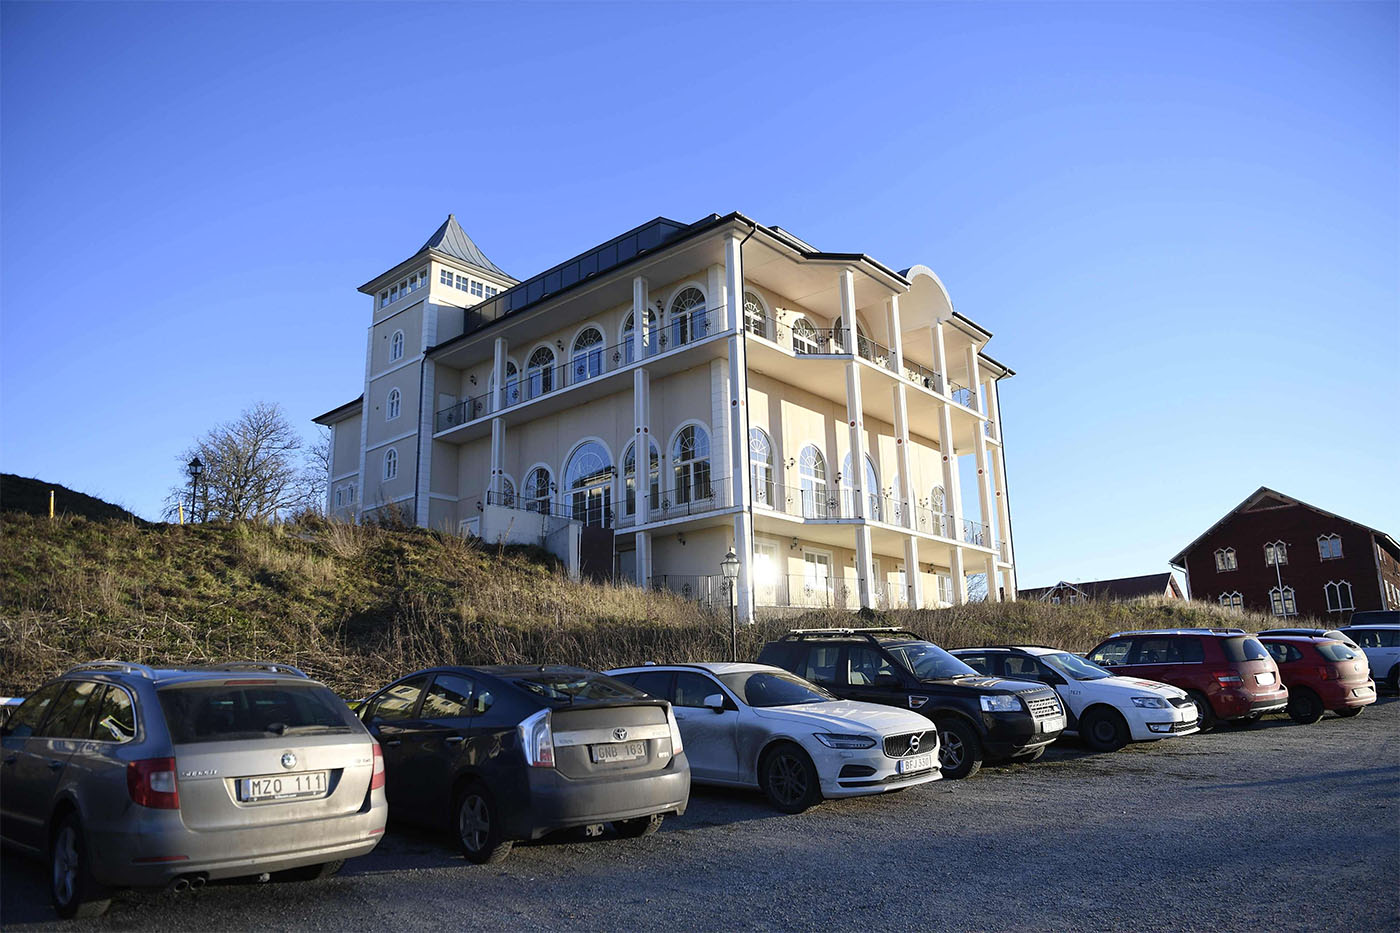 Peace talks are taking place at Johannesberg Castle in Rimbo, 50km north of Stockholm